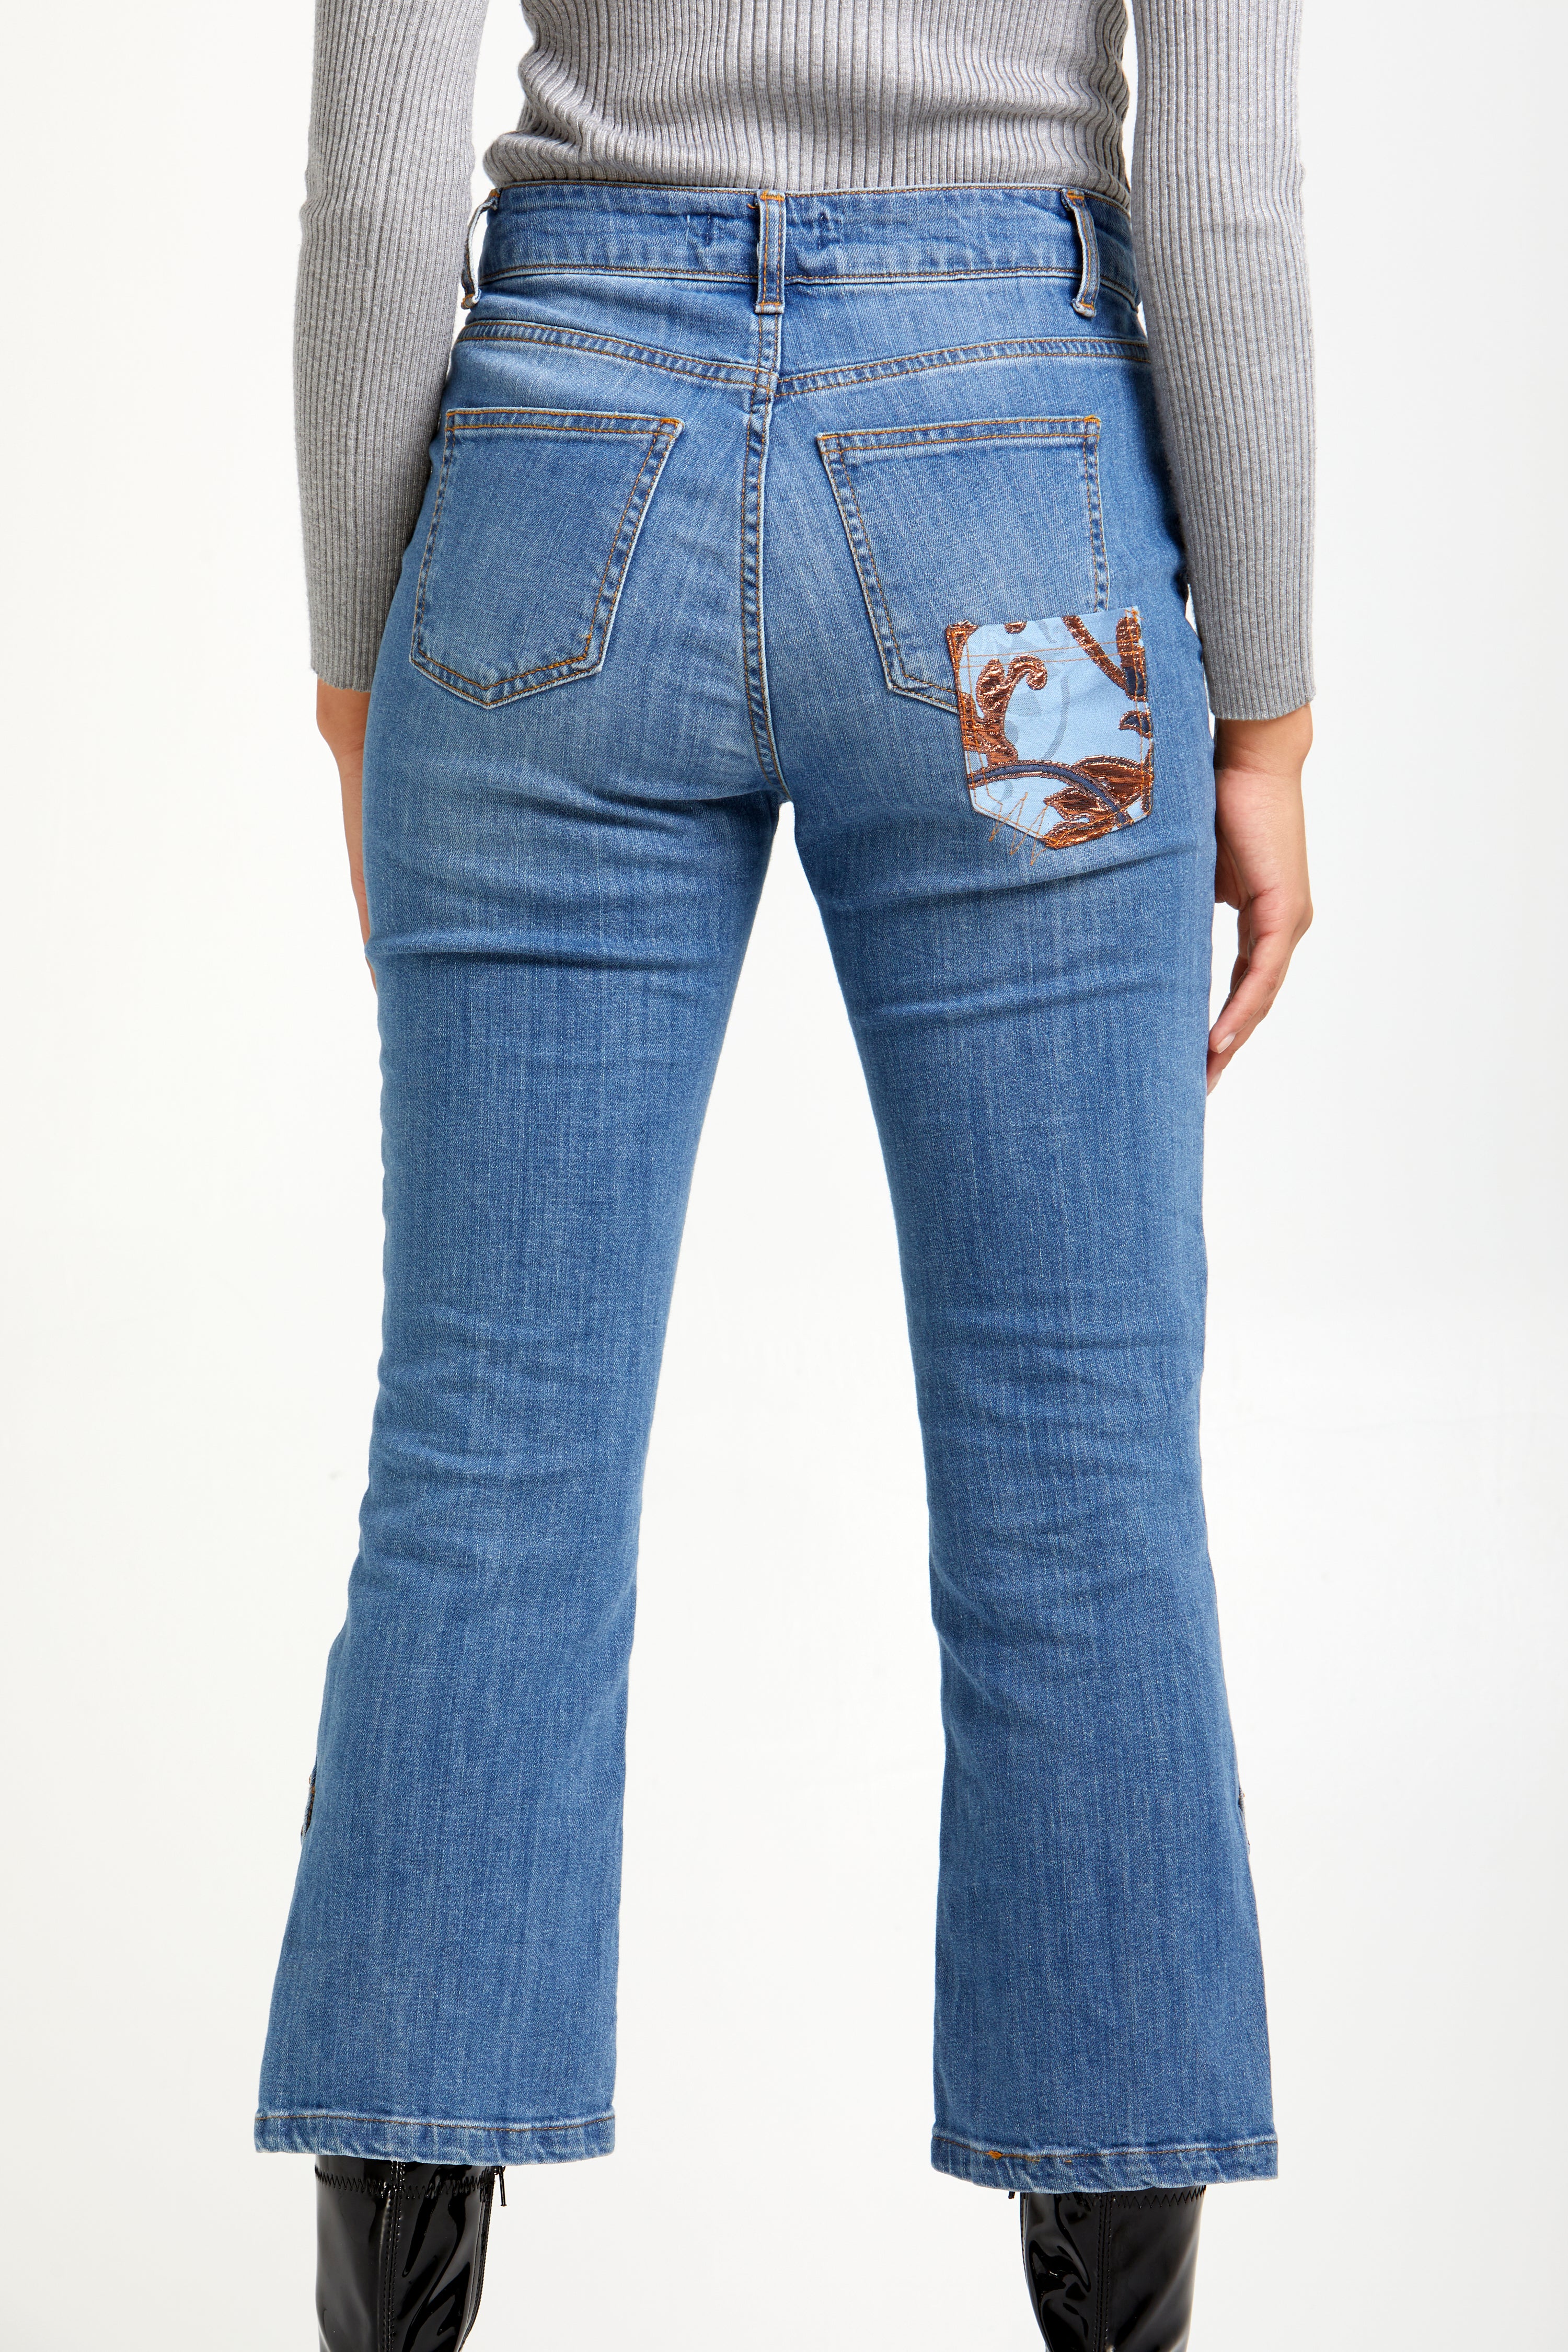 AnnaCristy Milano High Rise Cropped Cotton Jeans Back Closeup- Made in Italy